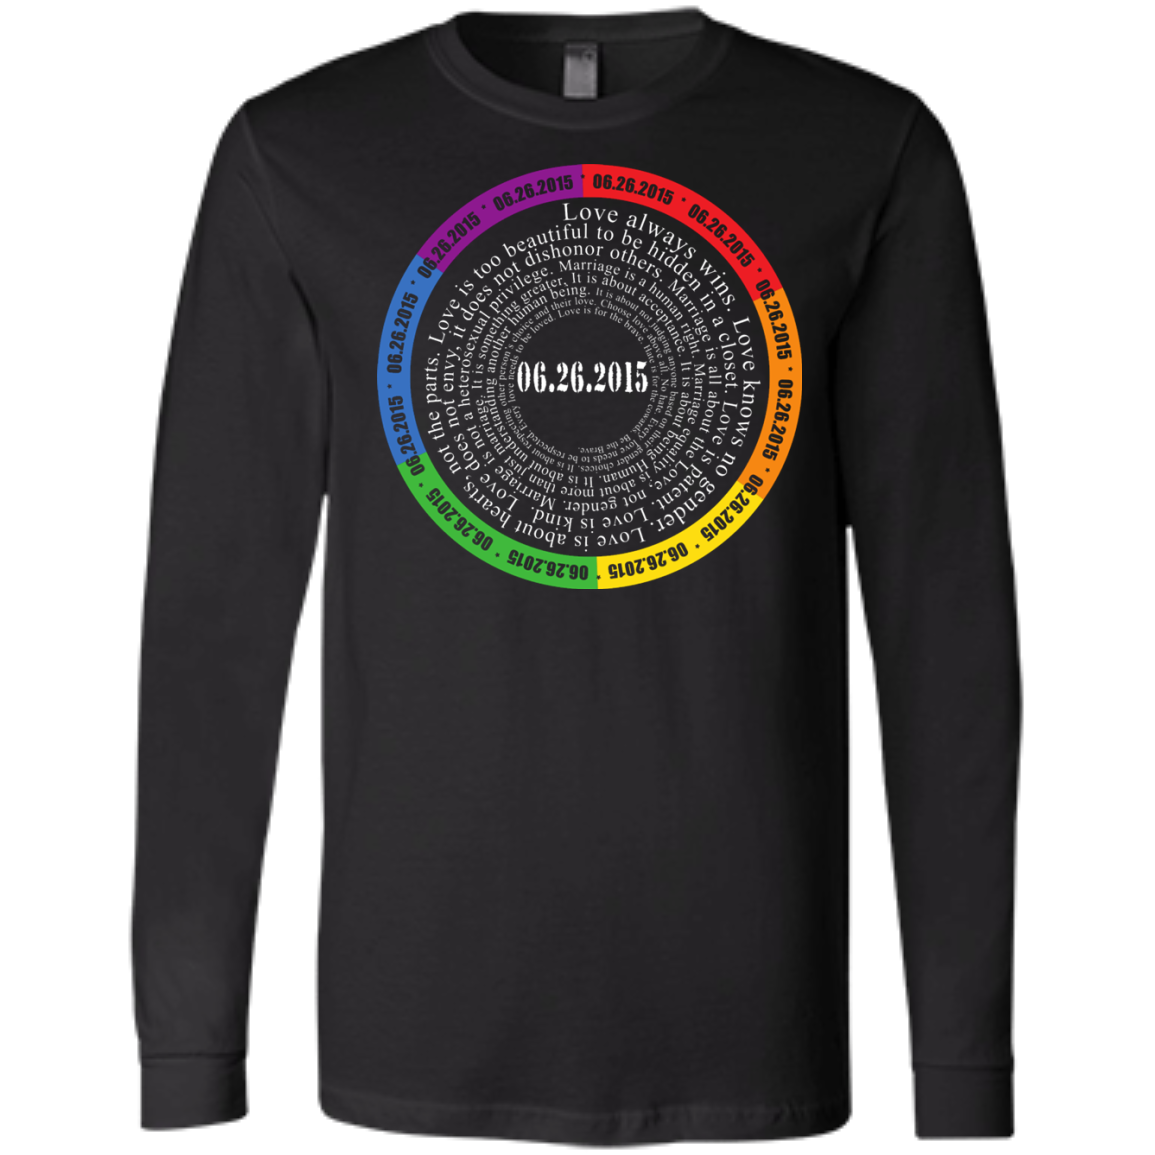 The "Pride Month" Special Shirt LGBT Pride full sleeves sport shirt for Men